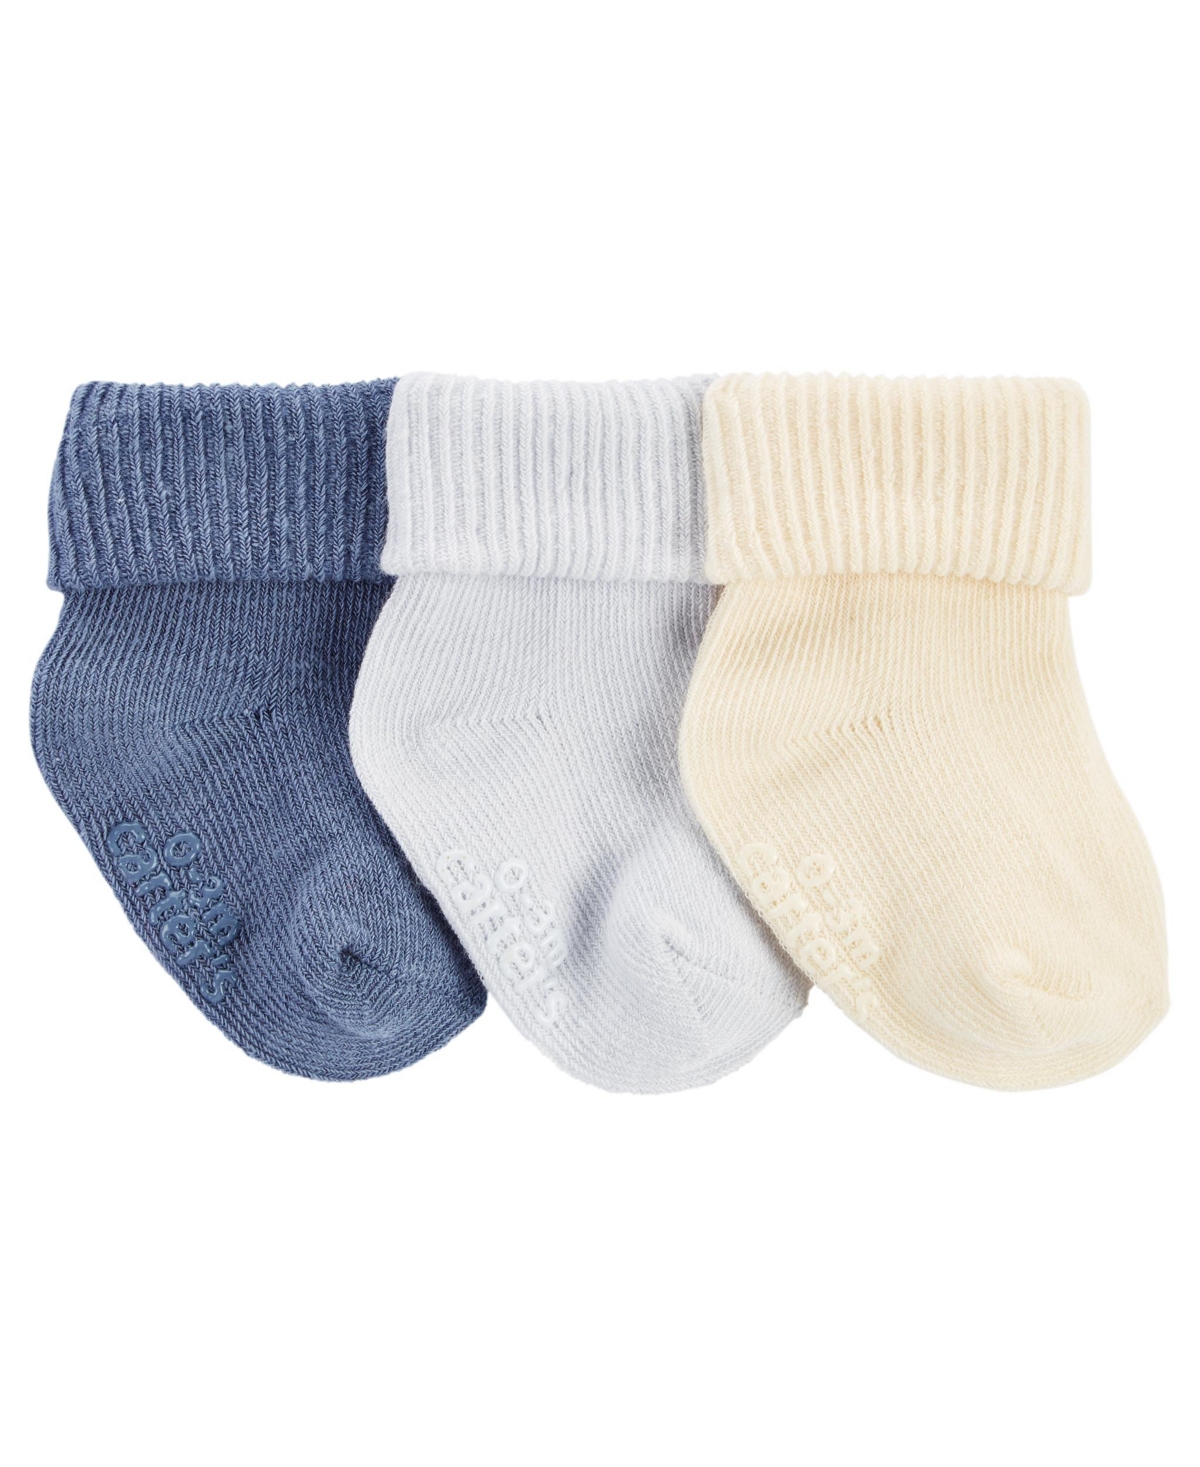 Carter's Baby Boys Soft Cotton Ribbed Socks, Pack Of 3 In Blue